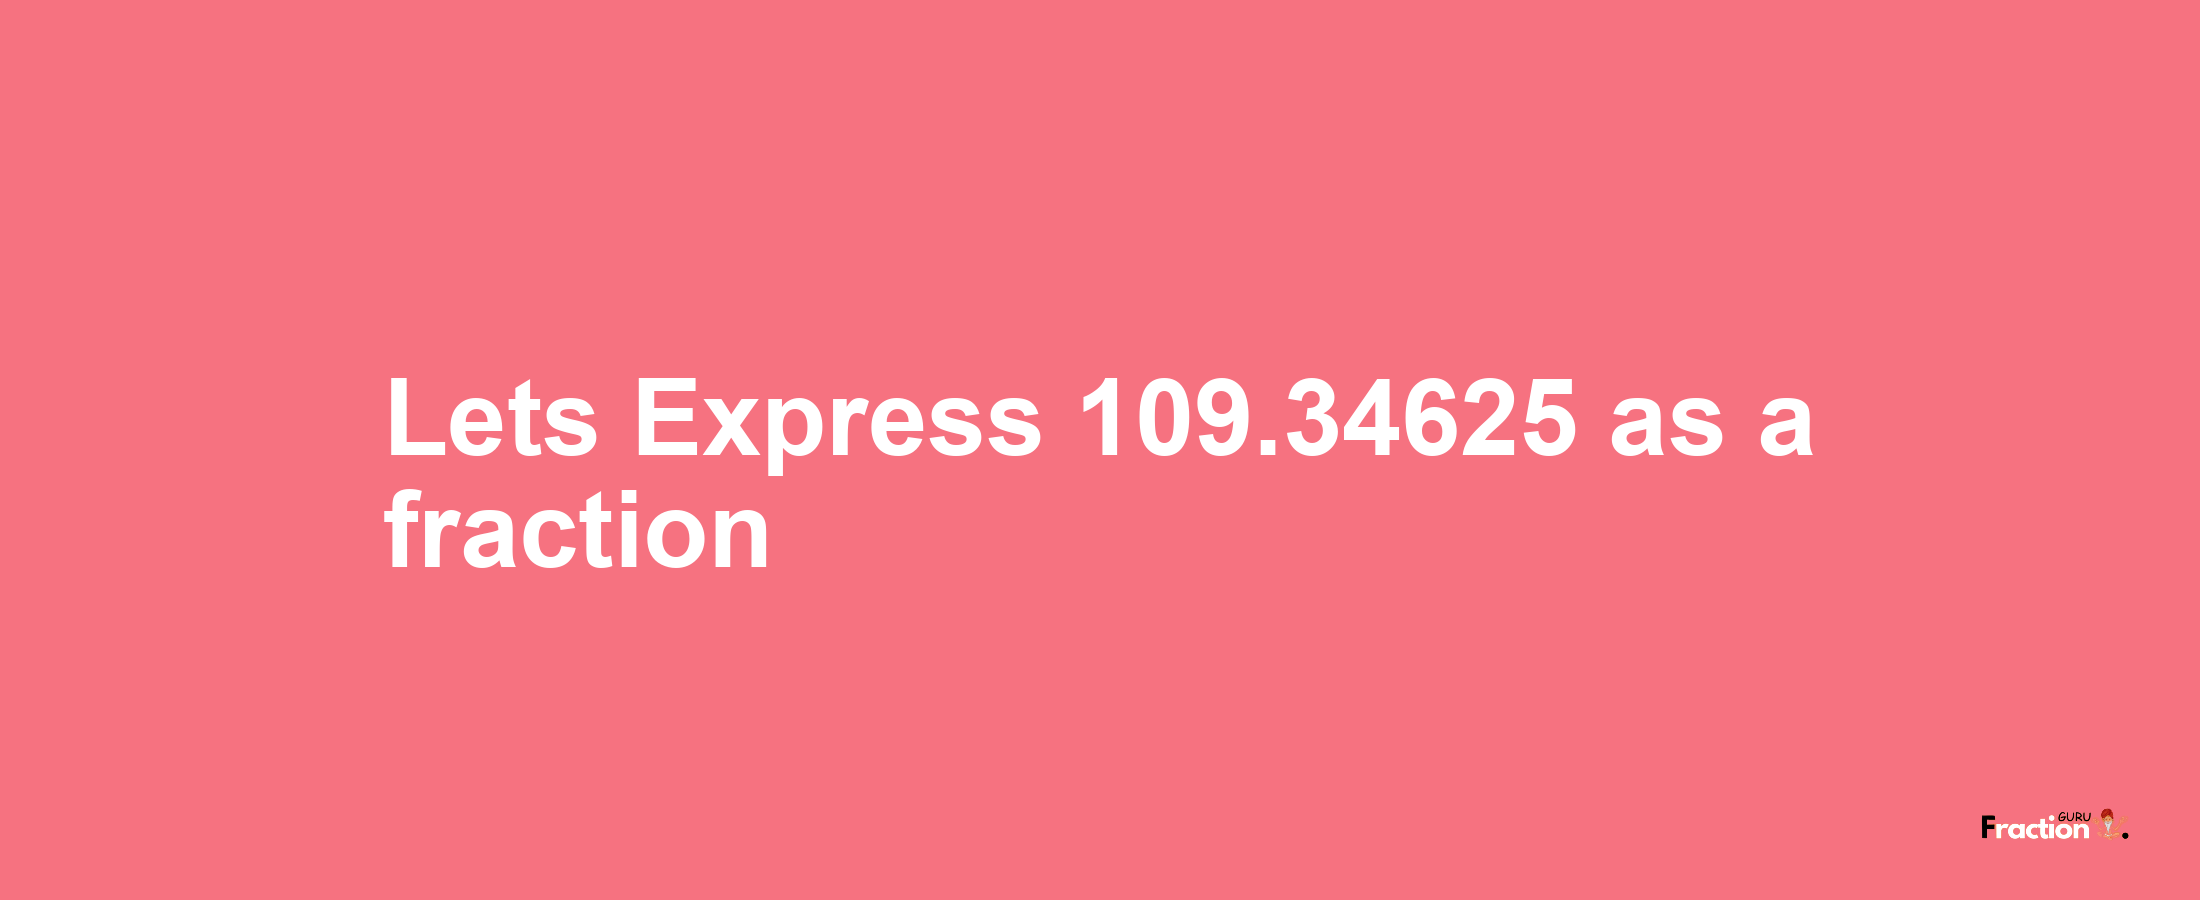 Lets Express 109.34625 as afraction